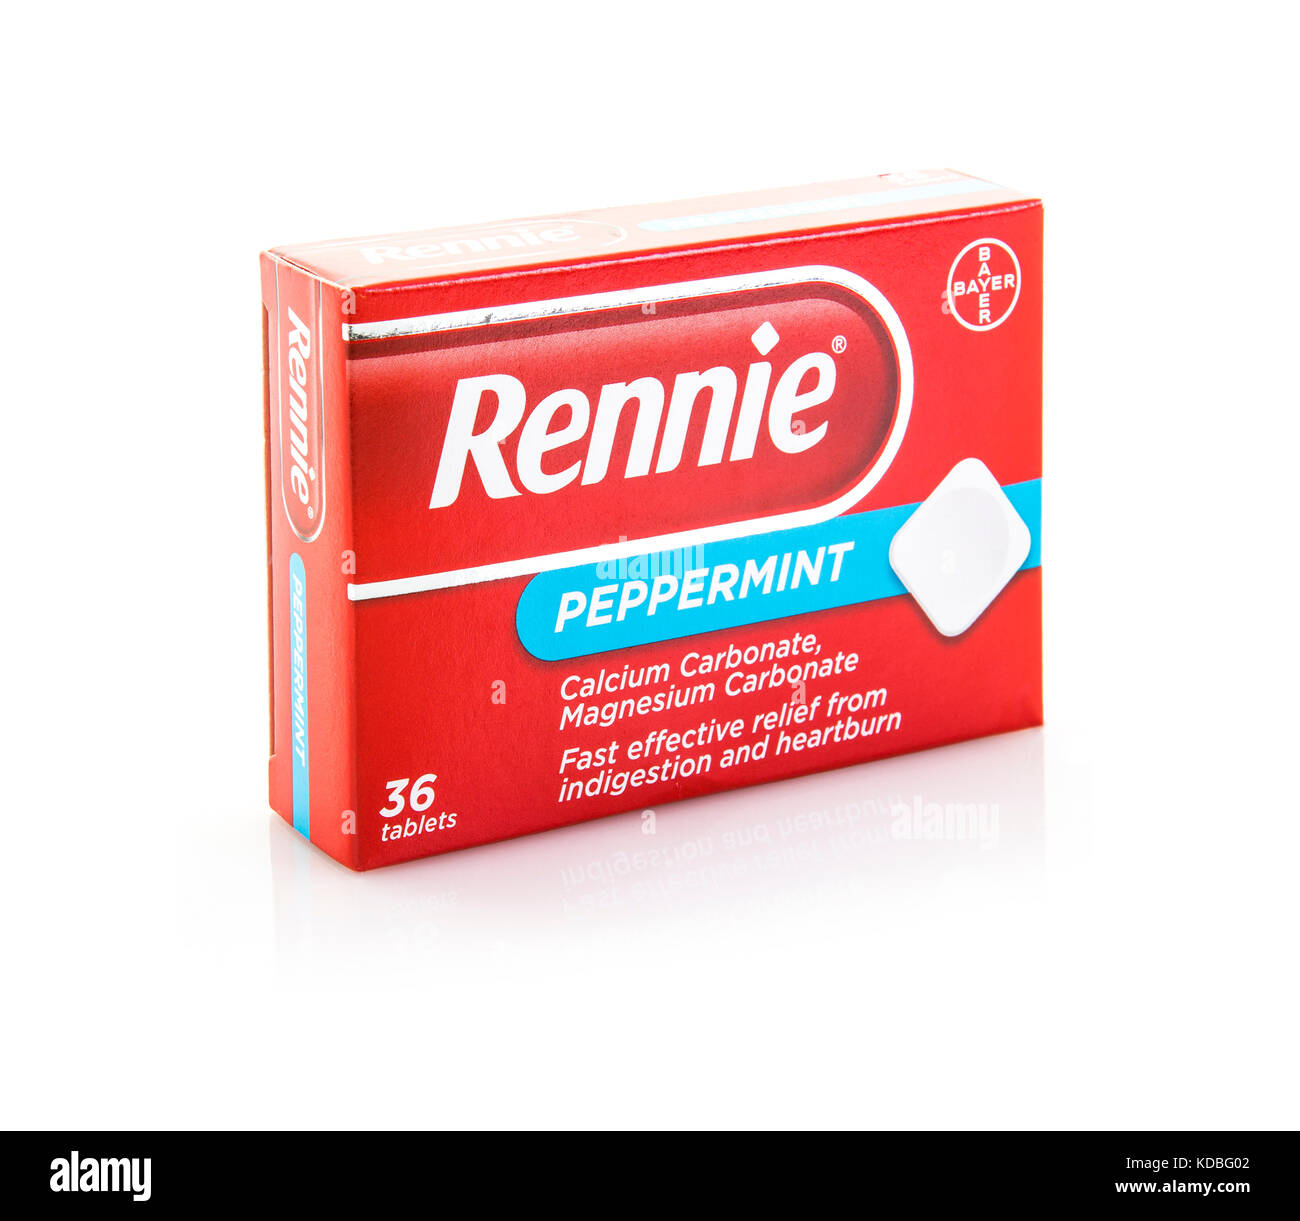 SWINDON, UK - OCTOBER 12, 2017: Packet of Peppermint Rennie Indigestion and Heartburn tablets on a white background Stock Photo